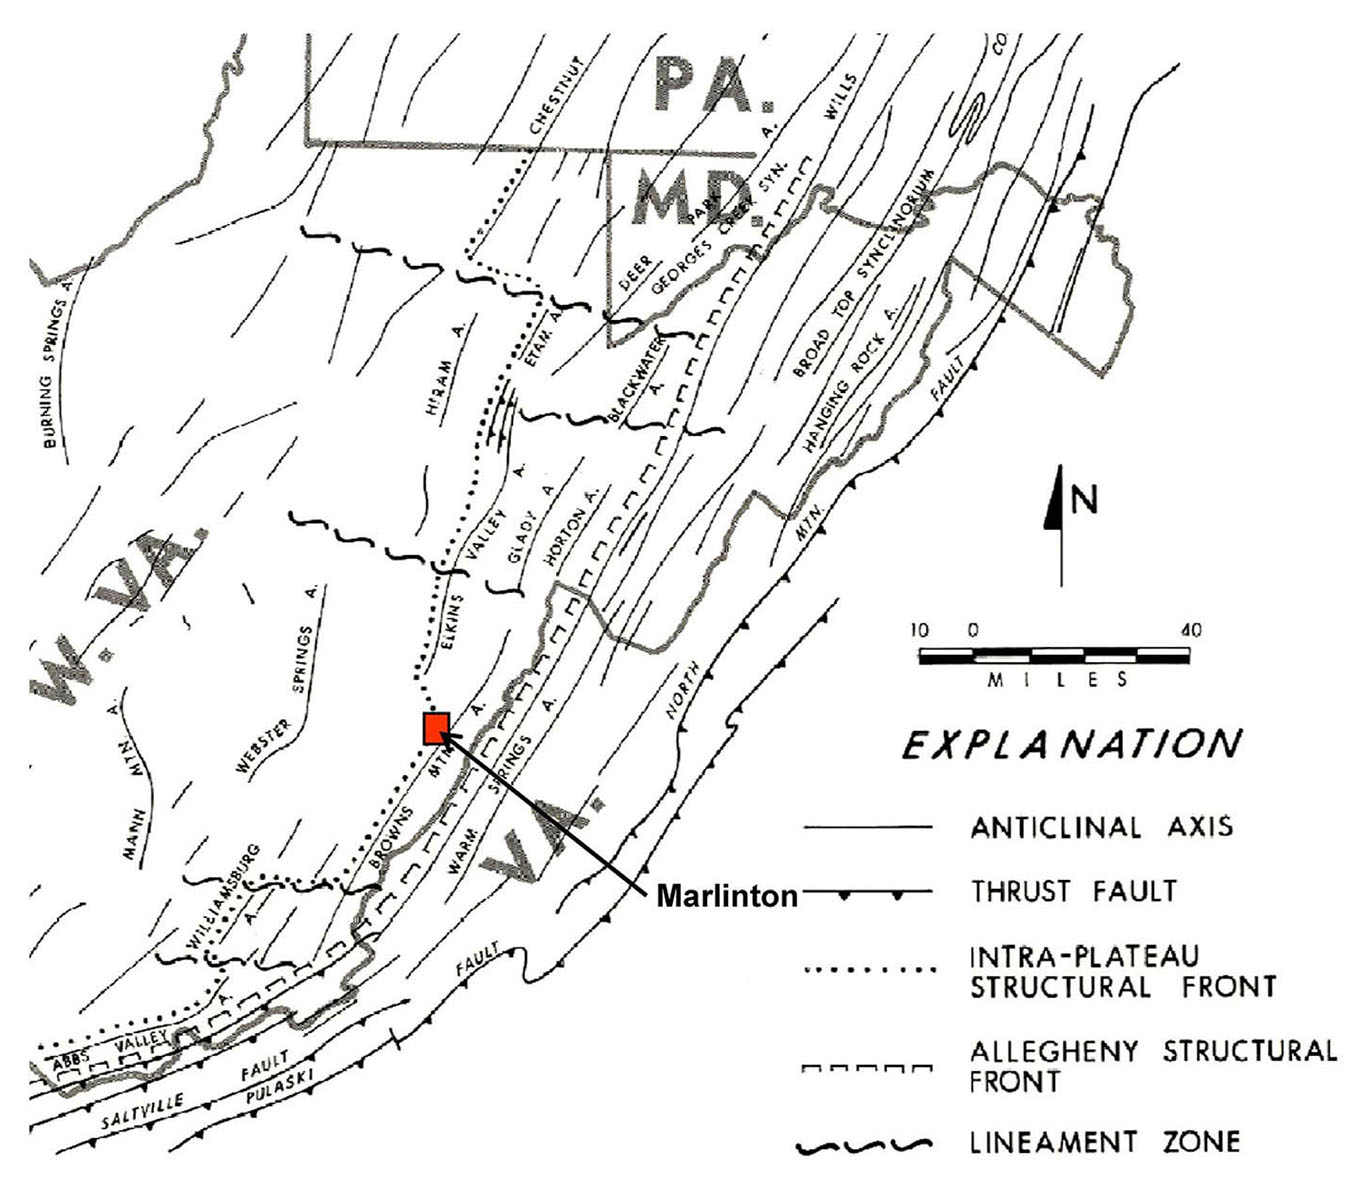 Physiographic provinces and the location of the Marlinton Quadrangle